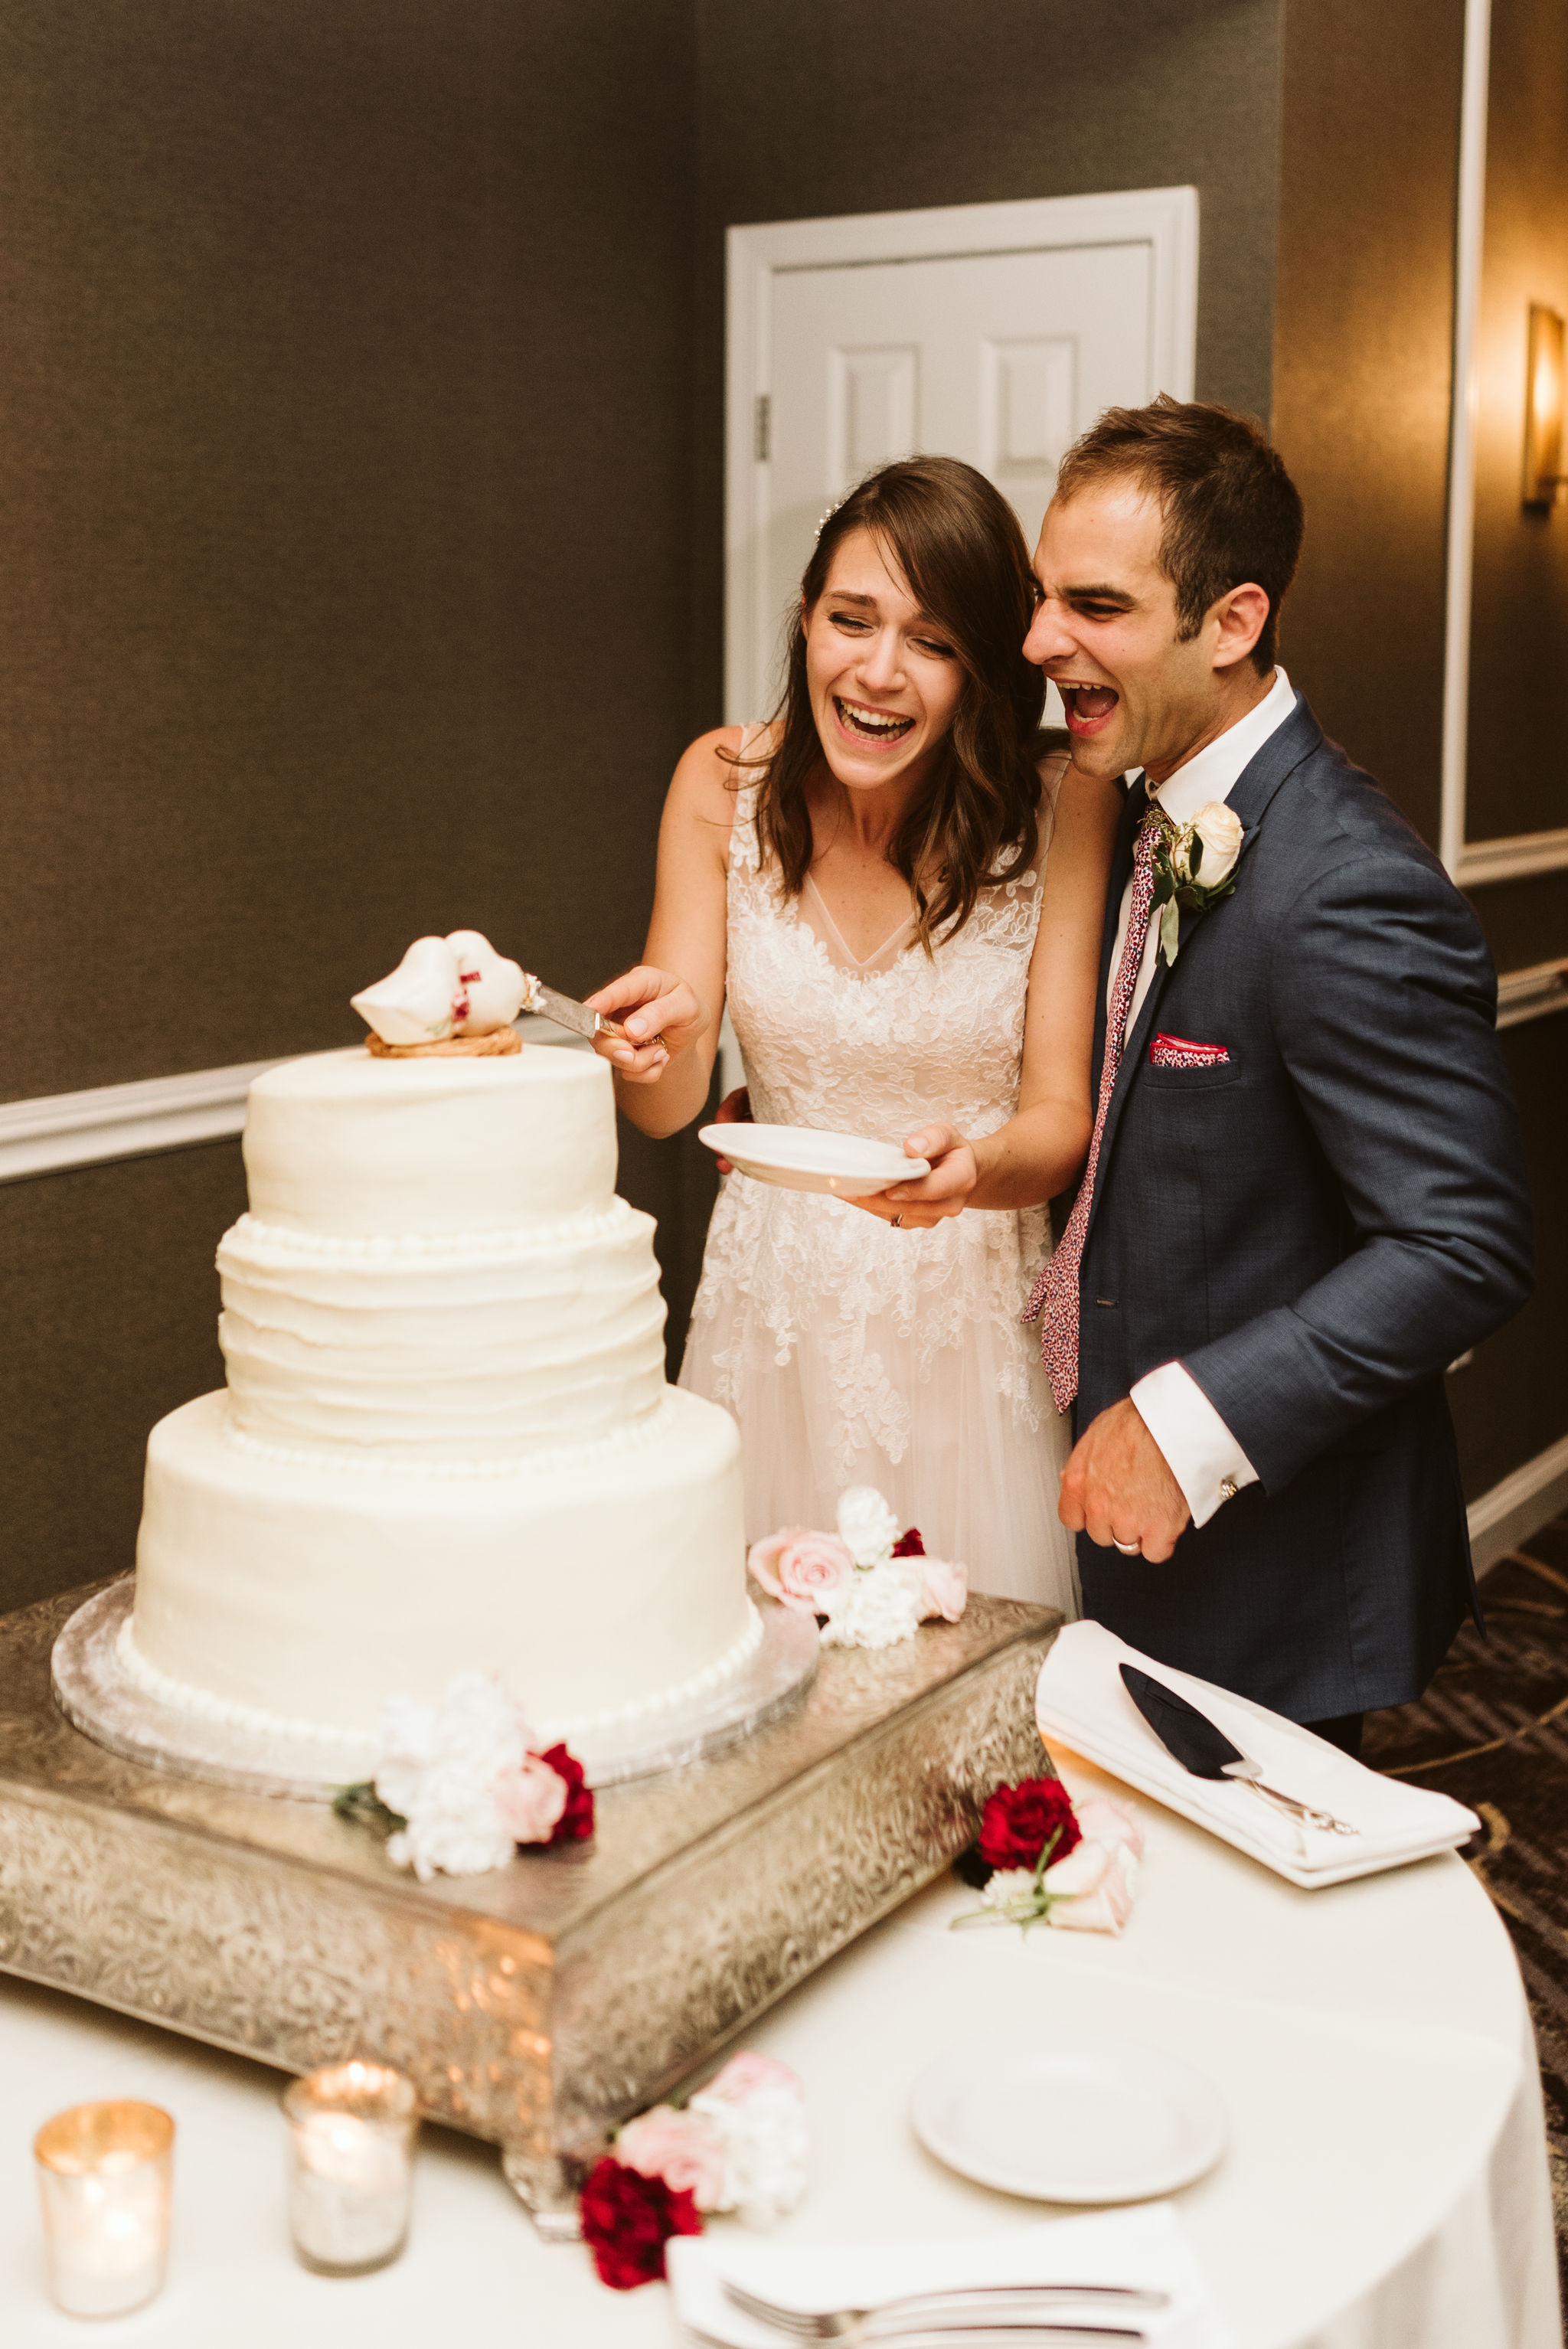  Phoenix Maryland, Baltimore Wedding Photographer, Eagle’s Nest Country Club, Classic, Romantic, Bride and Groom Laughing While Cutting the Wedding Cake, Graul’s Market 